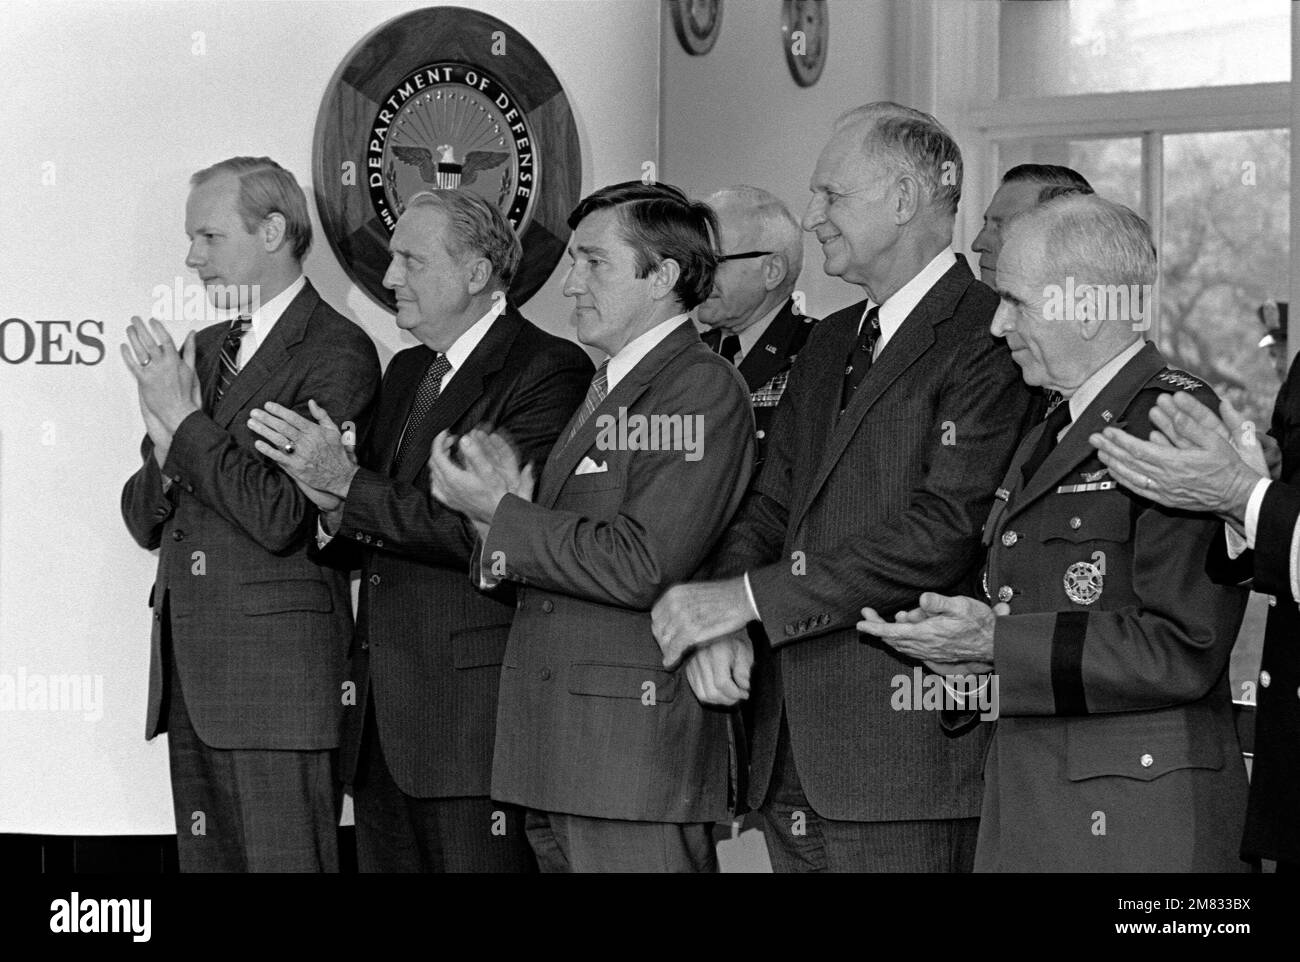 DD-SN-03-00653. [Complete] Scene Caption: Retiring Senator John Tower, Texas, Chairman Senate Armed Services Committee, receives awards from Secretary of Defense Caspar W. Weinberger, Secretary of the Services, John O. Marsh Jr., USA; John F. Lehman, USN, Verne Orr, USAF and MASTER CHIEF PETTY Officer, Navy, William H. Plackett assisted by Sergeant Major, Marine Command CHIEF MASTER Sergeant William B. Tapp Jr. Also in attendance were Defense Secretary William H. Taft IV, Joint Chiefs of STAFF; General John W. Vessey Jr., USA, Chairman, General John A. Wickham Jr., USA, Admiral James D. Watkin Stock Photo